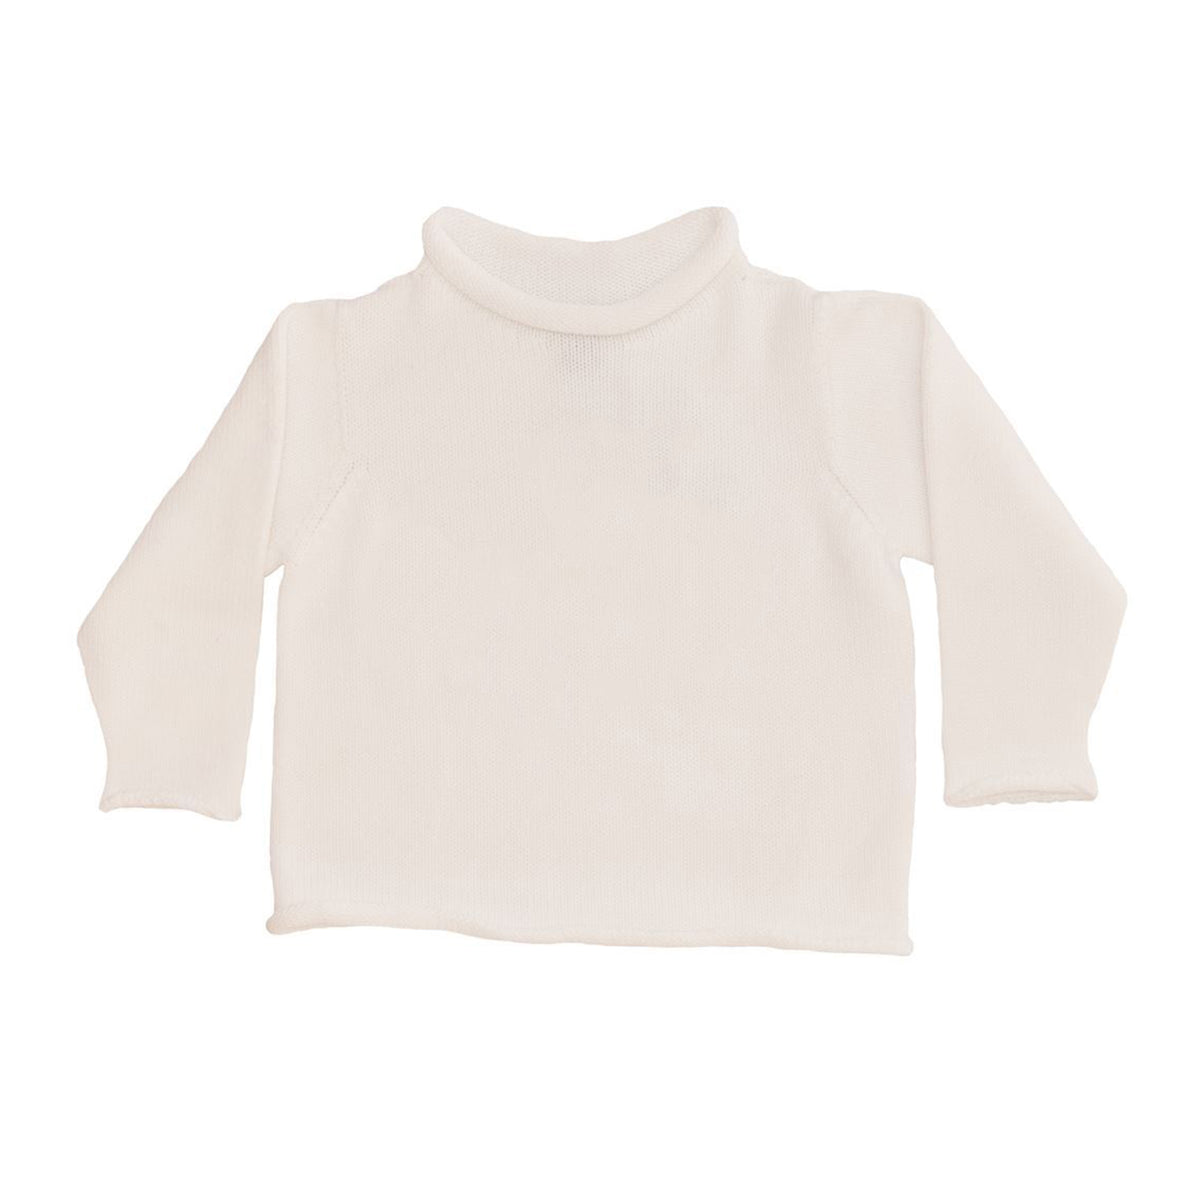 White Cotton Rollneck Sweater - All She Wrote